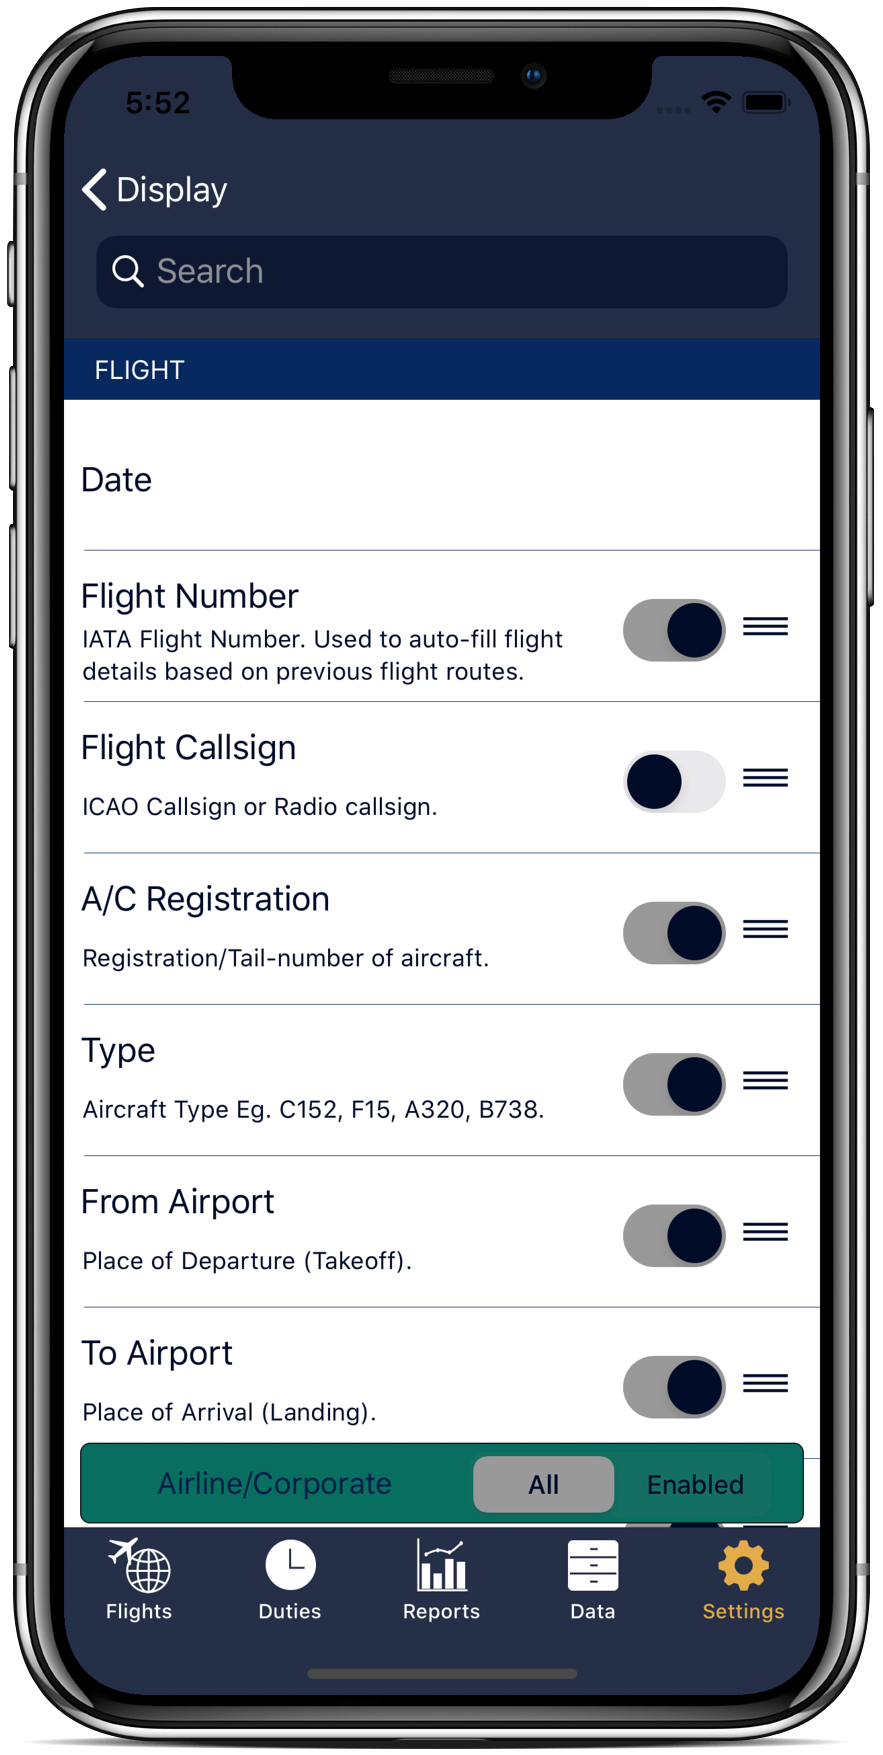 Log your flights how you want with flight page customization.